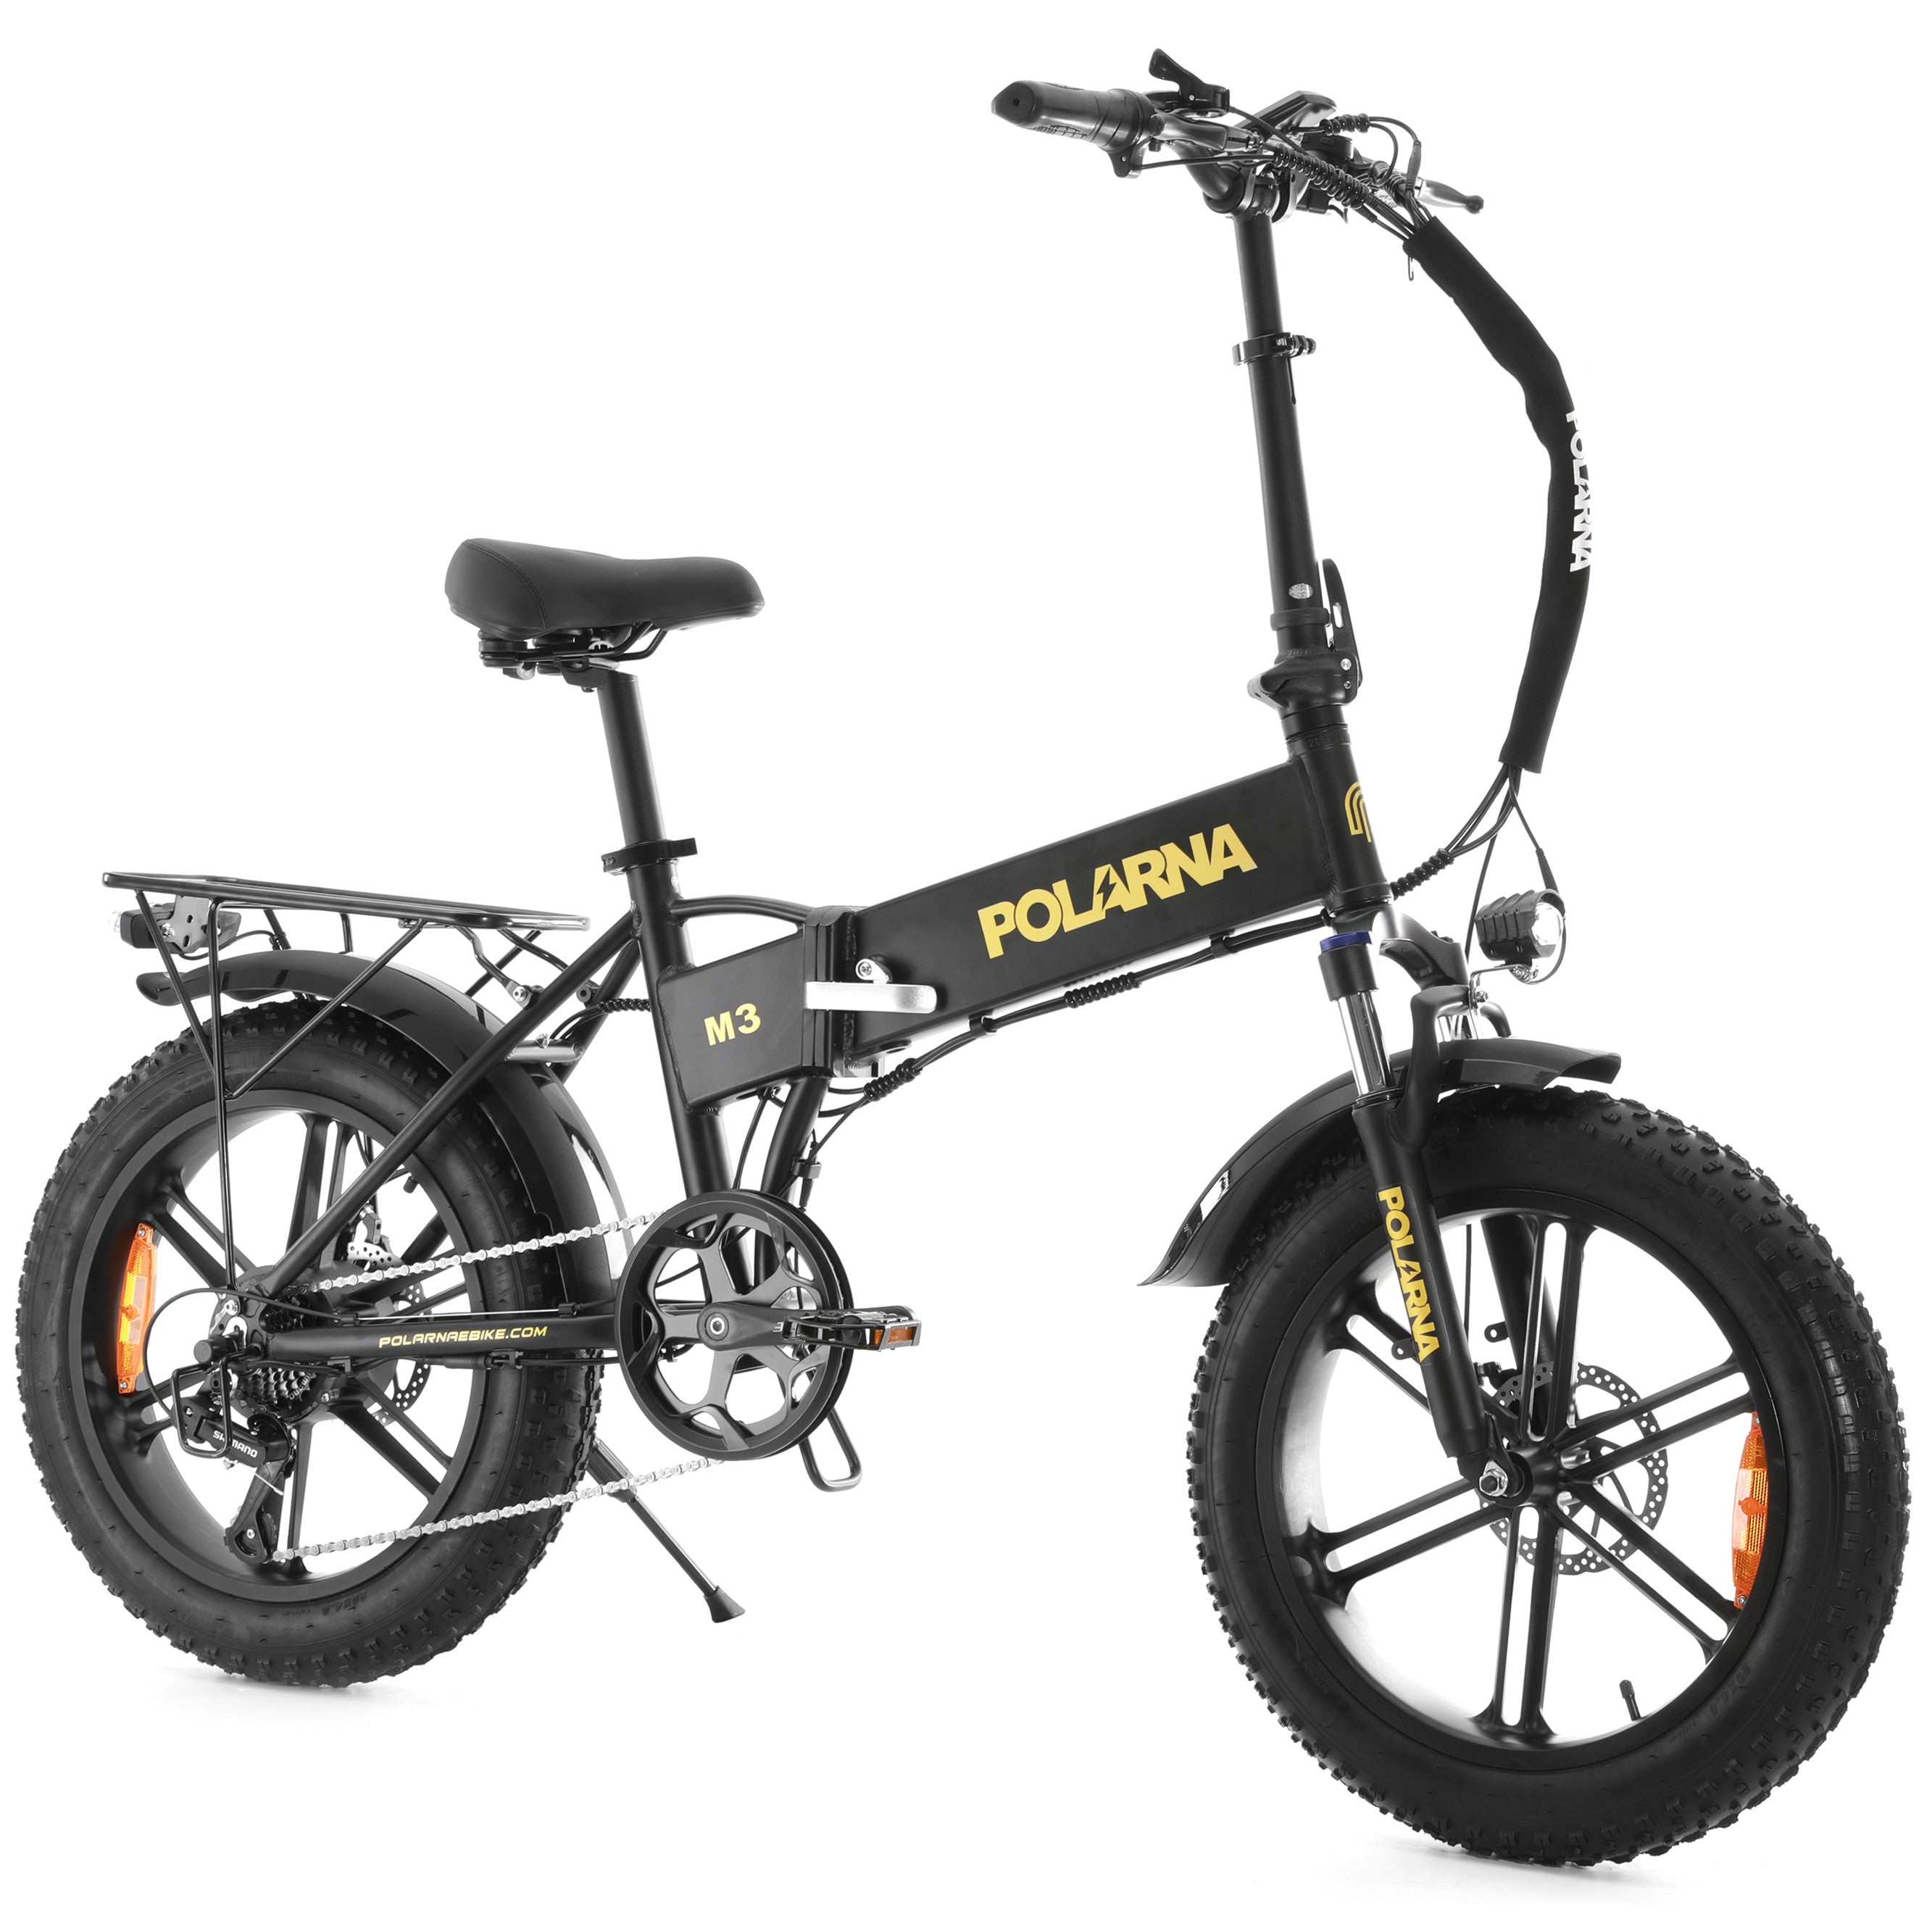 POLARNA M3 20“ Fat Tire Foldable Electric Bike With 750W Motor 48V 13Ah Battery for Snow Sand Outdoor(USA)